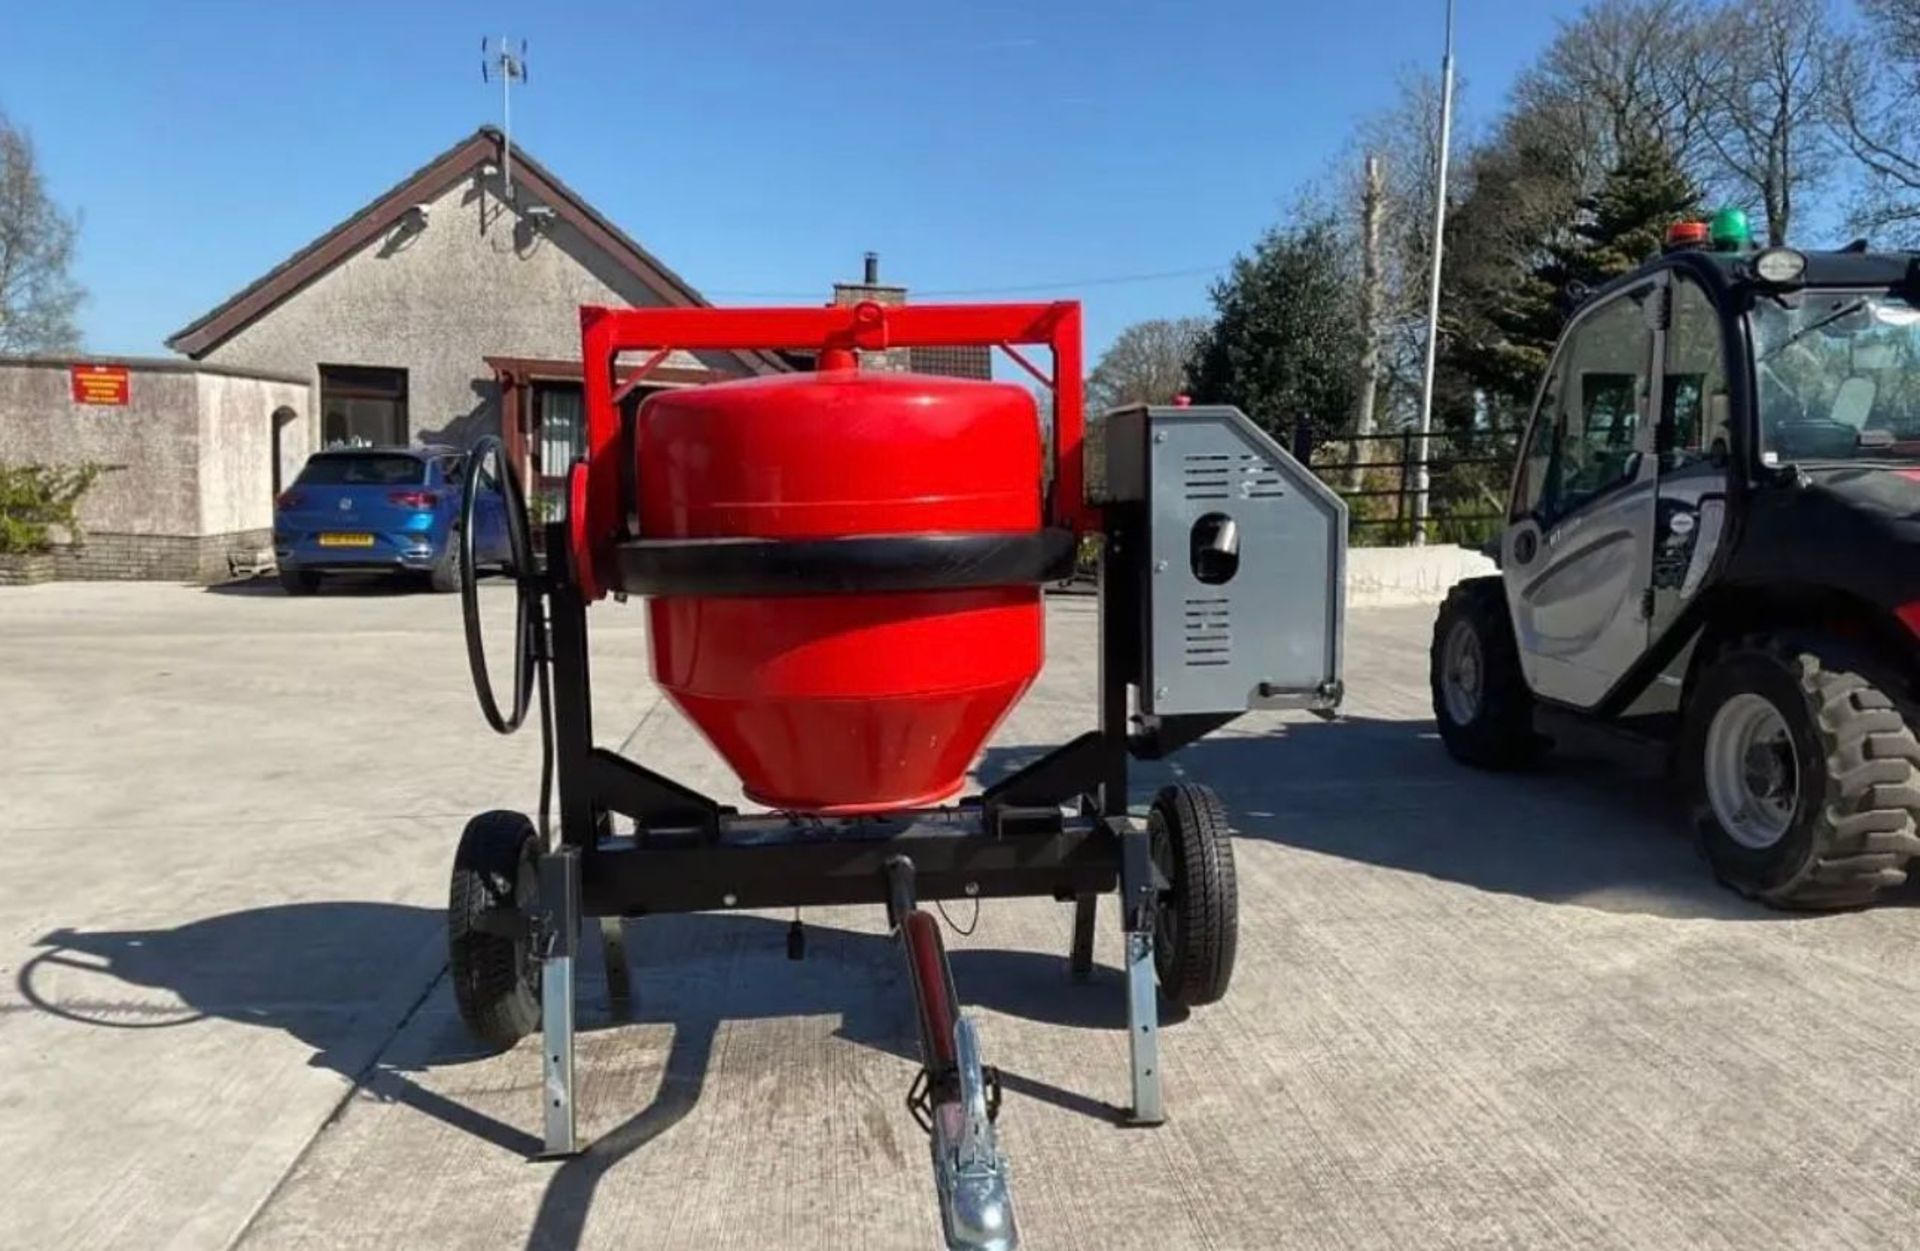 NEW/UNUSED MANITOU CMT400 TOWBEHIND CEMENT MIXER *PLUS VAT* - Image 3 of 10